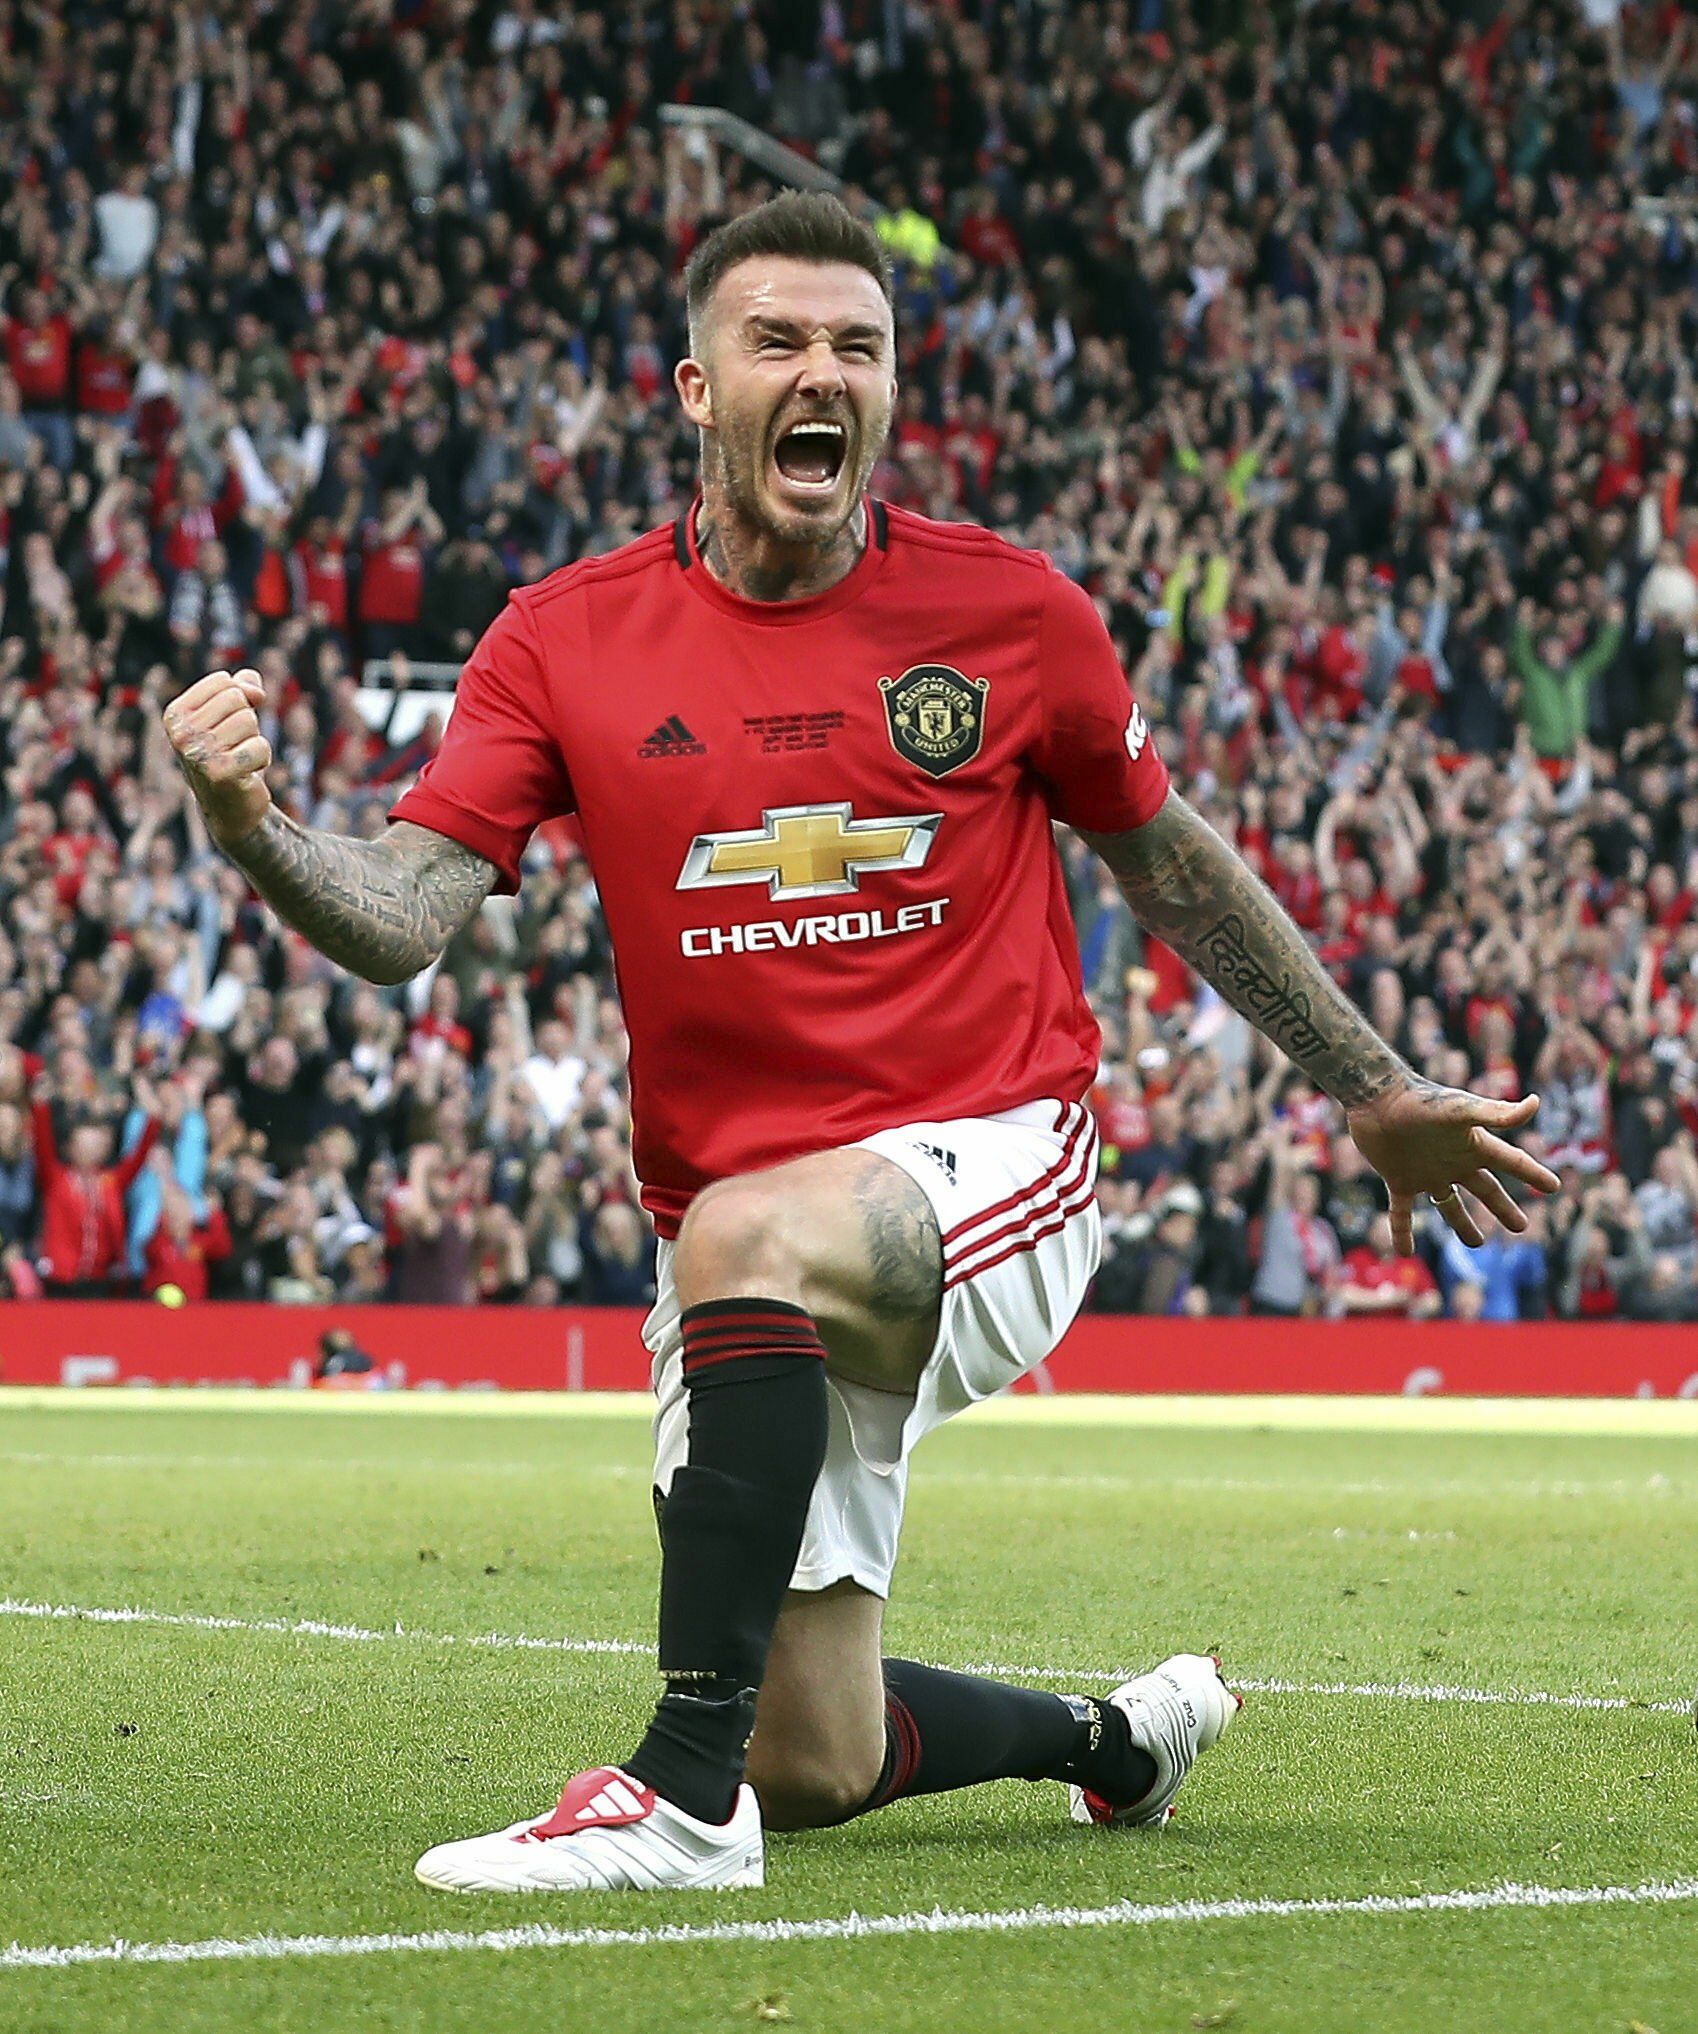 Beckham scores as United faces Bayern 20 years after CL win